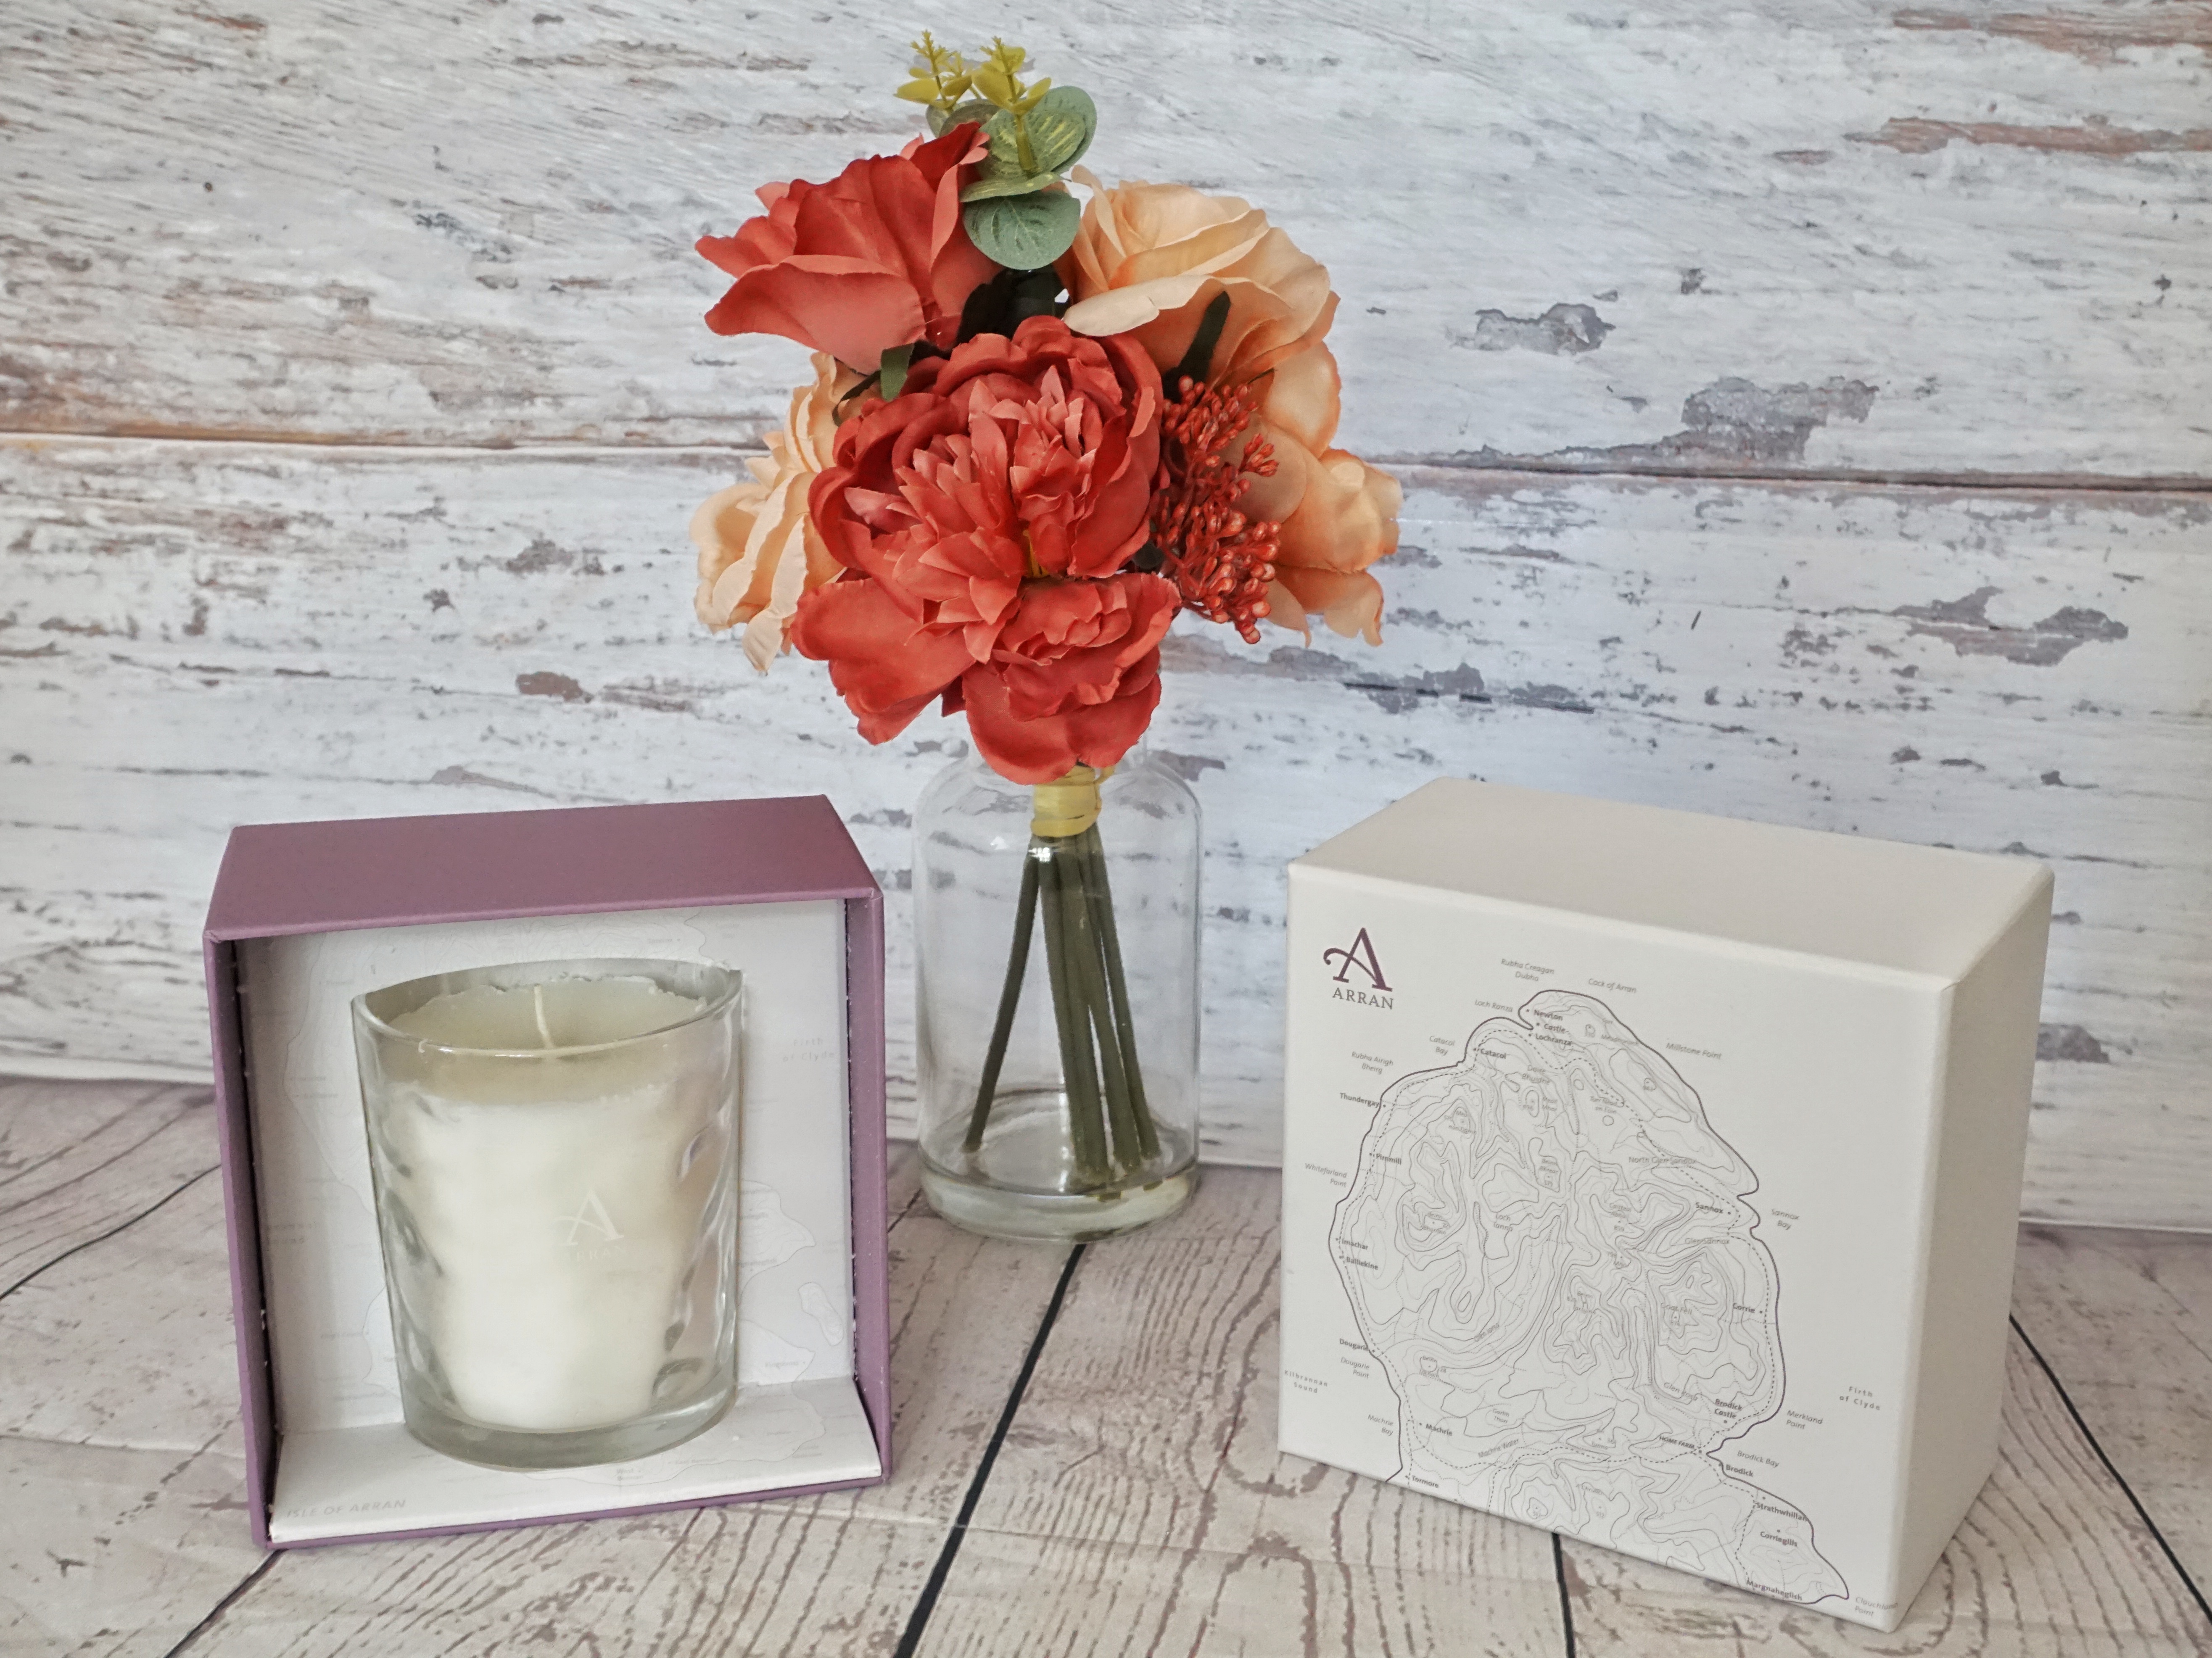 Arran Sense of Scotland Candle presented against a wooden background with red and peach flowers in a vase behind